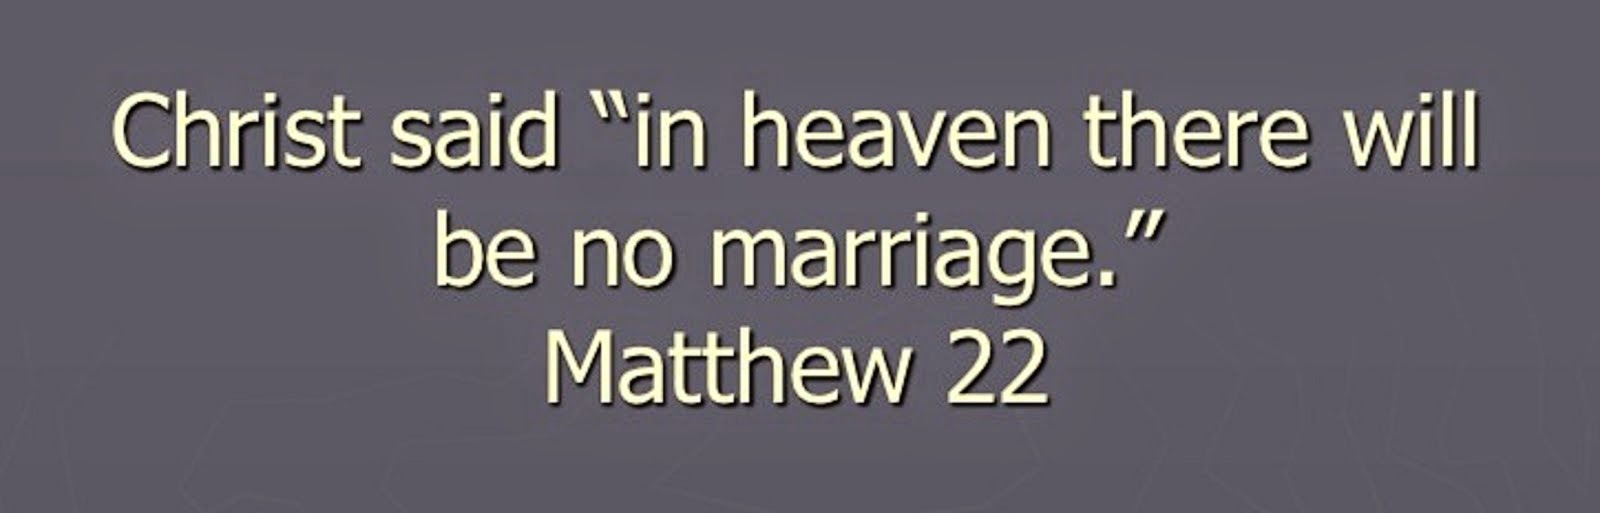 THERE IS NO MARRIAGE IN HEAVEN